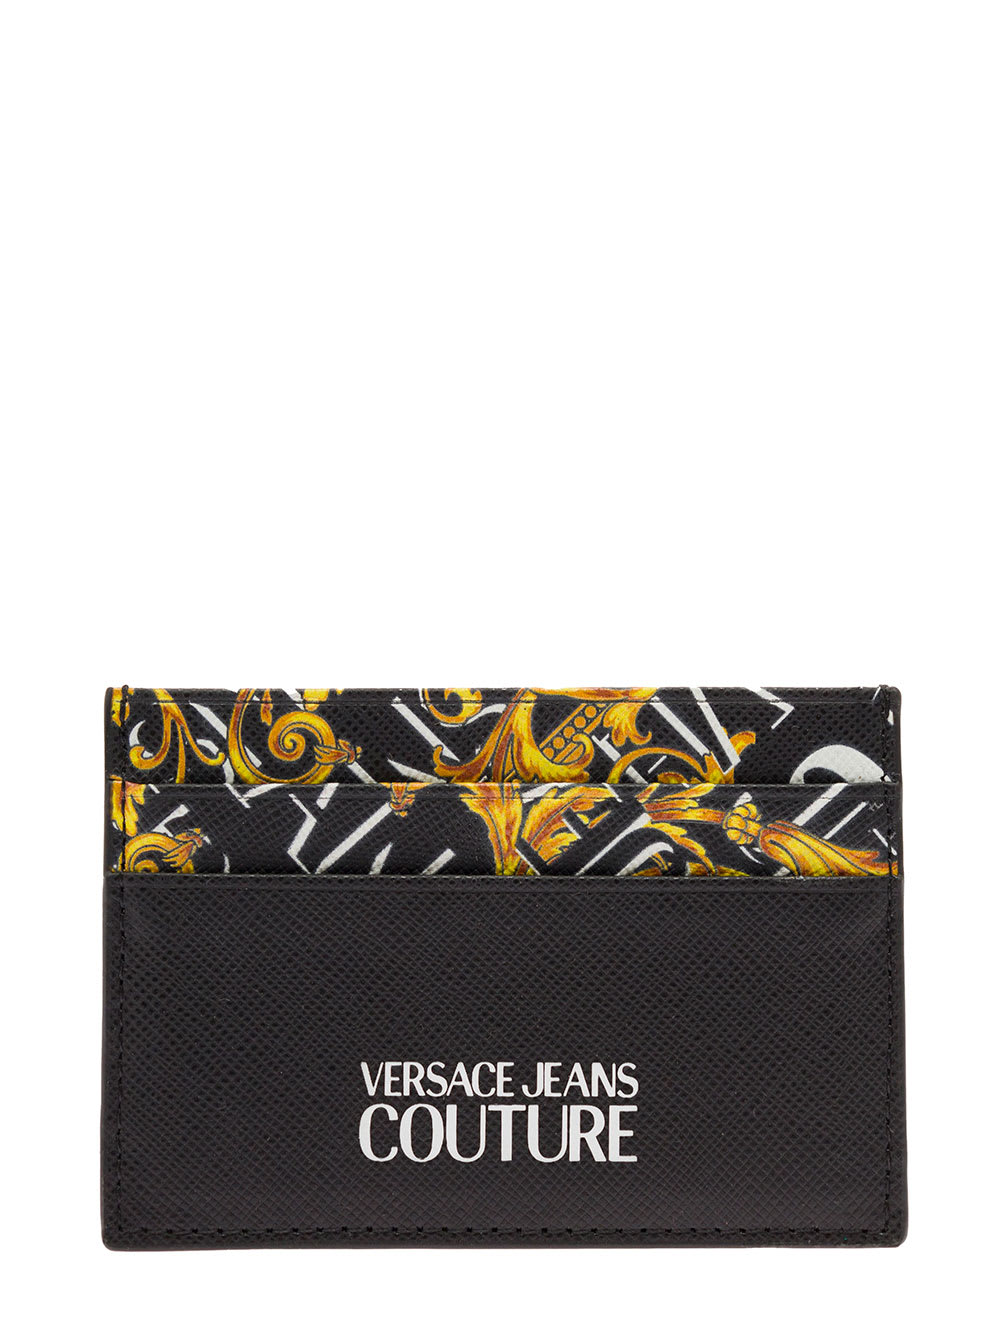 Versace Jeans Couture Range Logo Couture - Sketch 2 Wallet